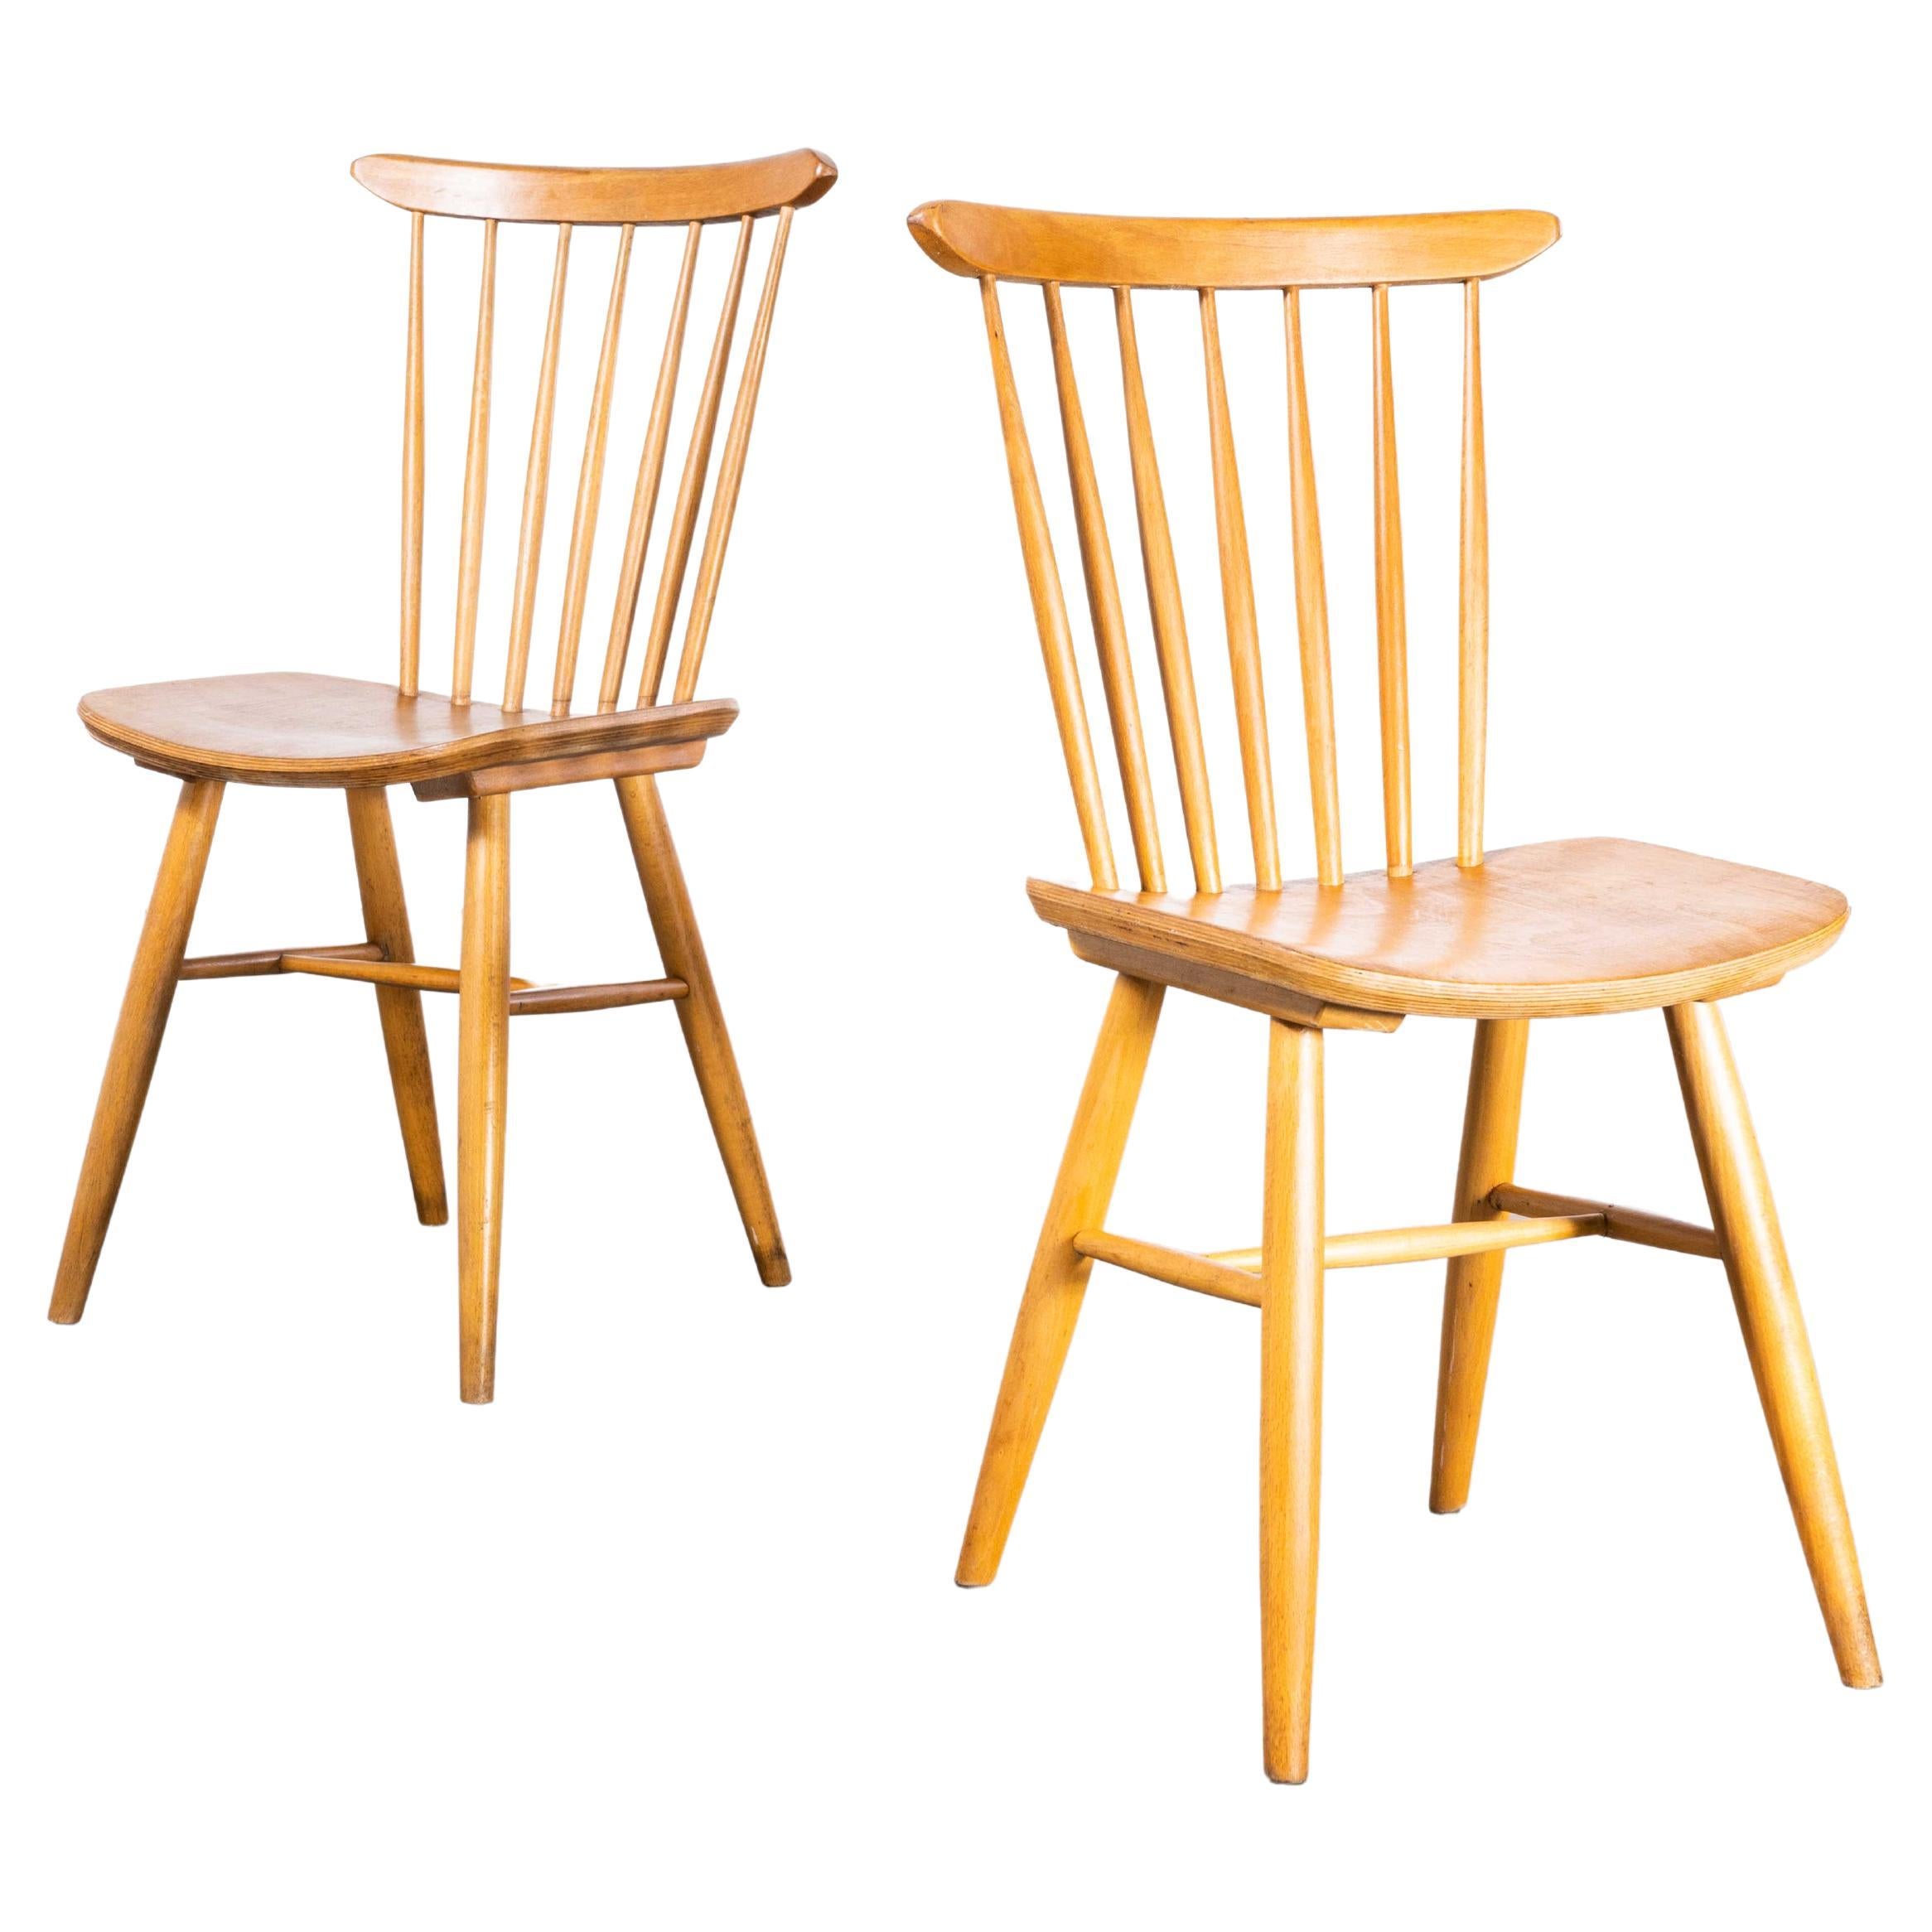 1950 Honey Oak Stickback Chairs, Saddle Seat, by Ton, Pair For Sale